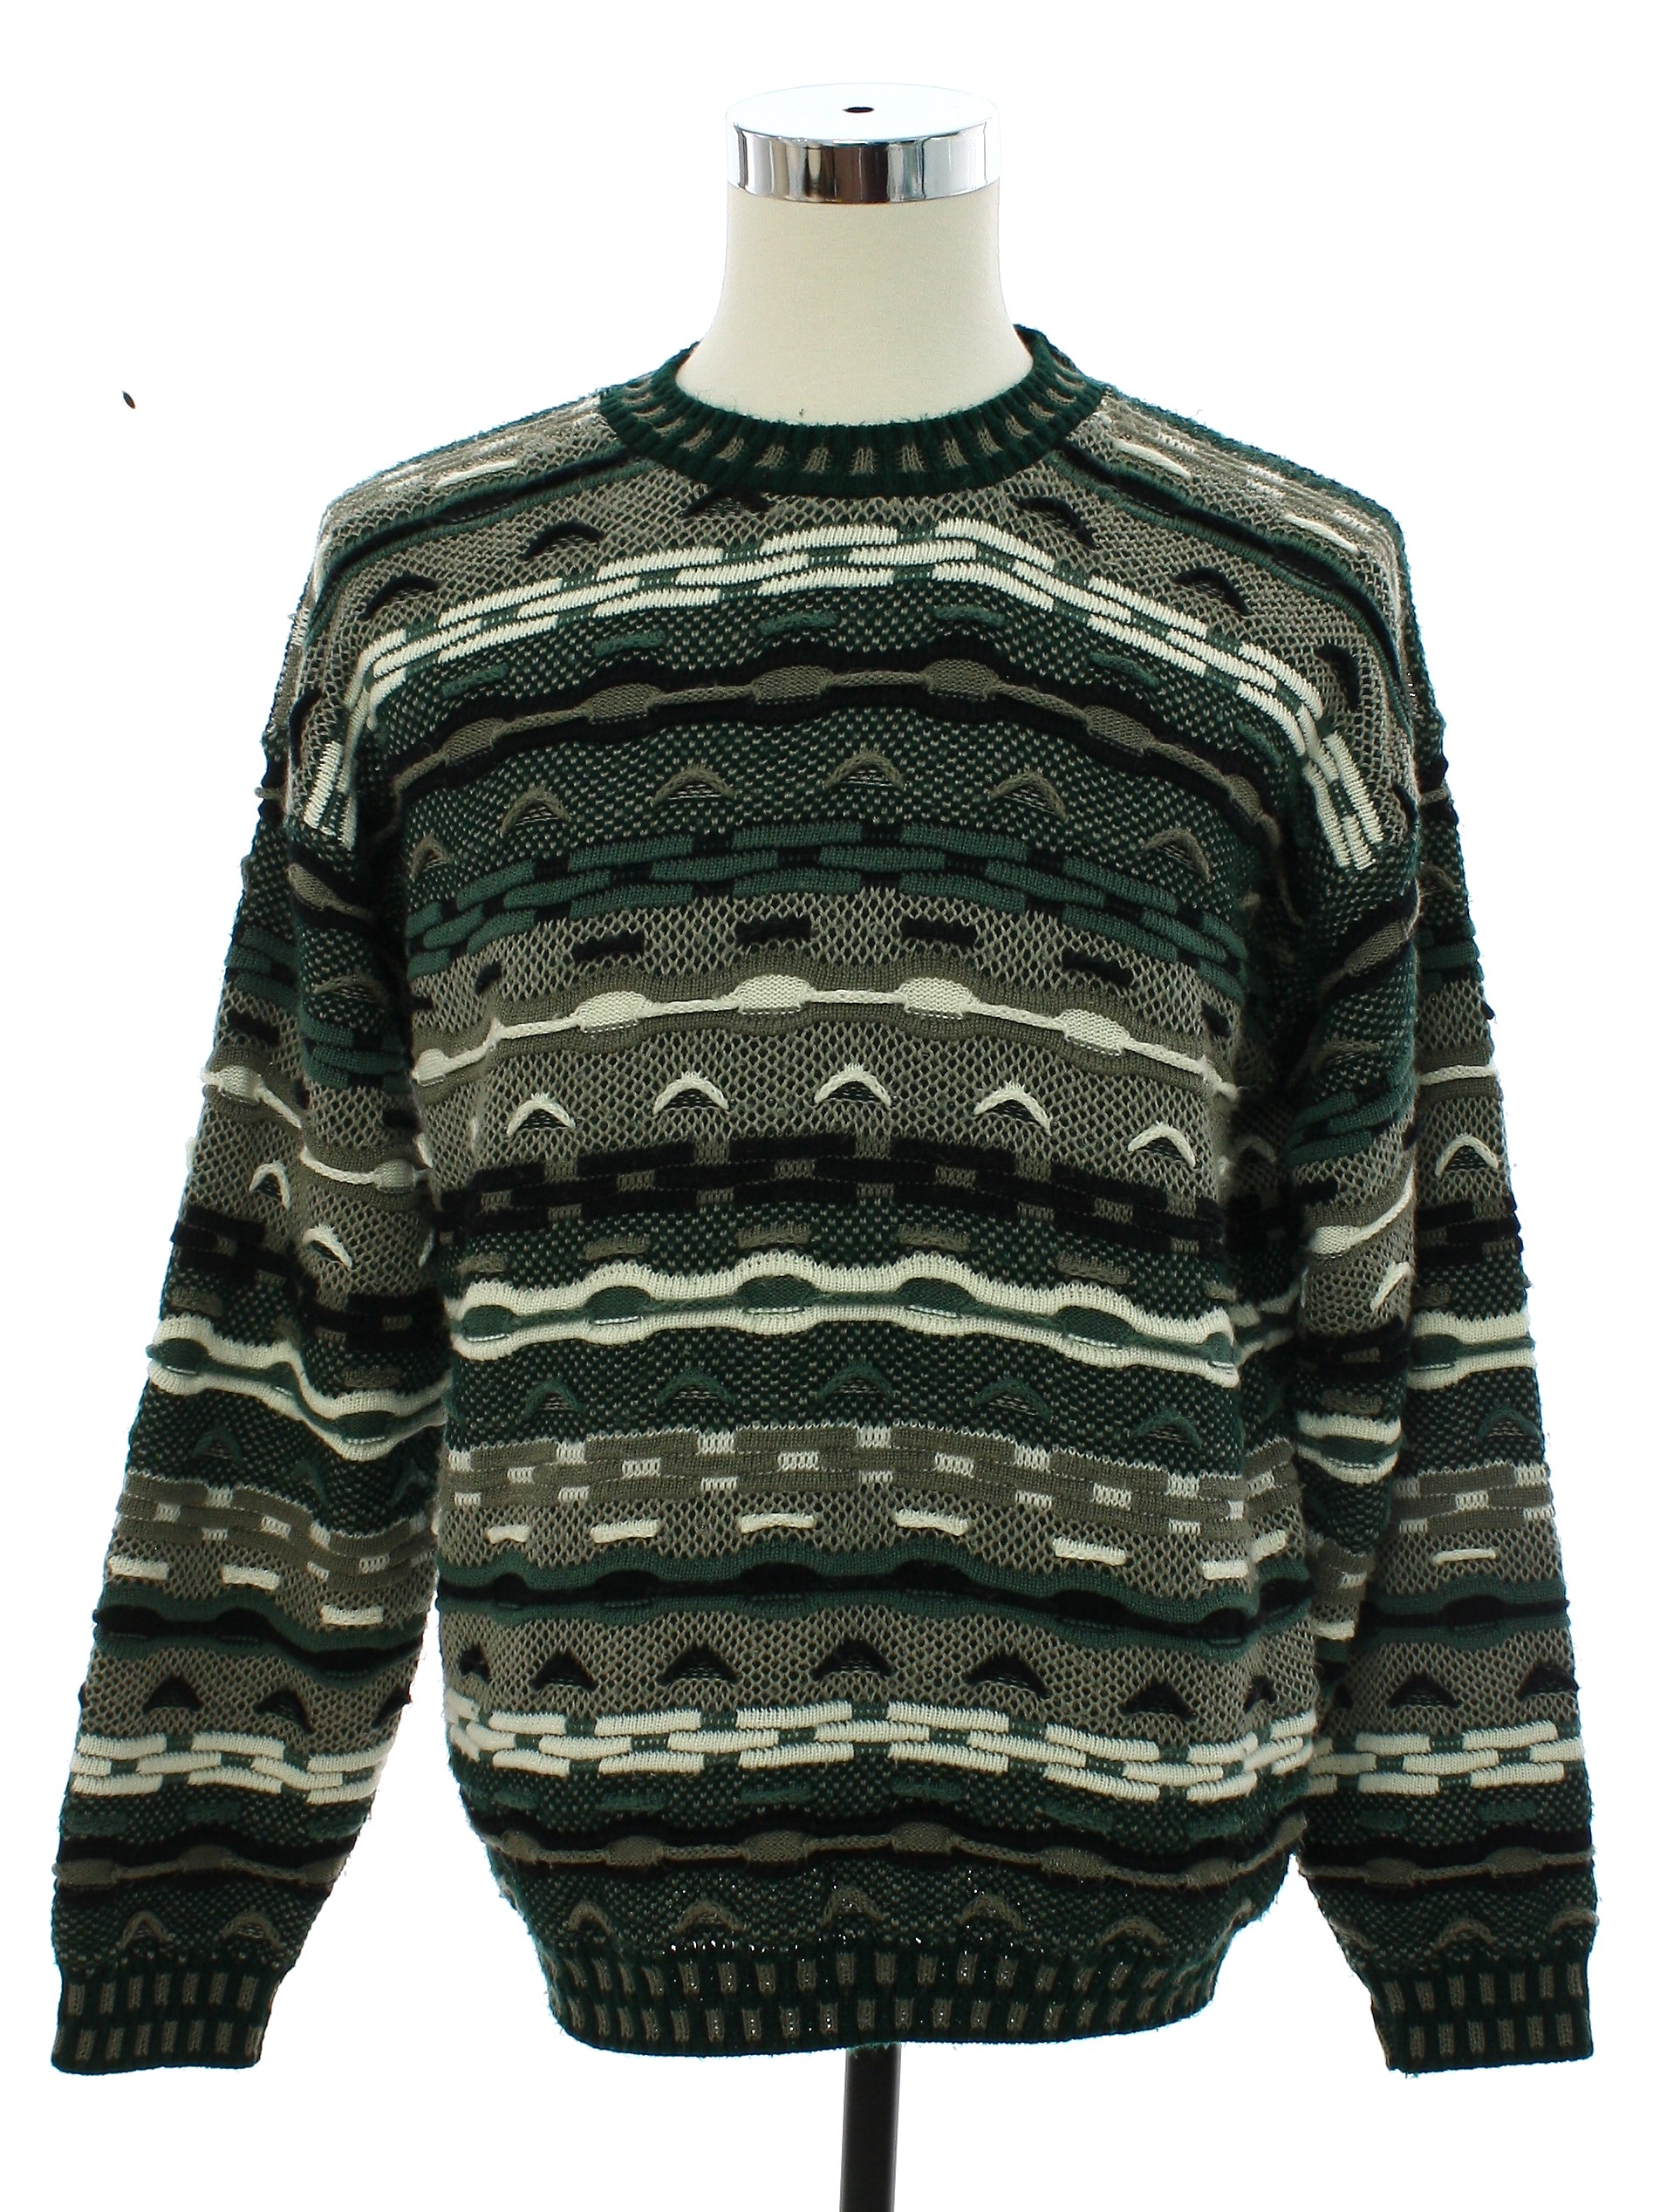 Retro 1990's Sweater (Protege) : 90s style (made in 2000s) -Protege ...